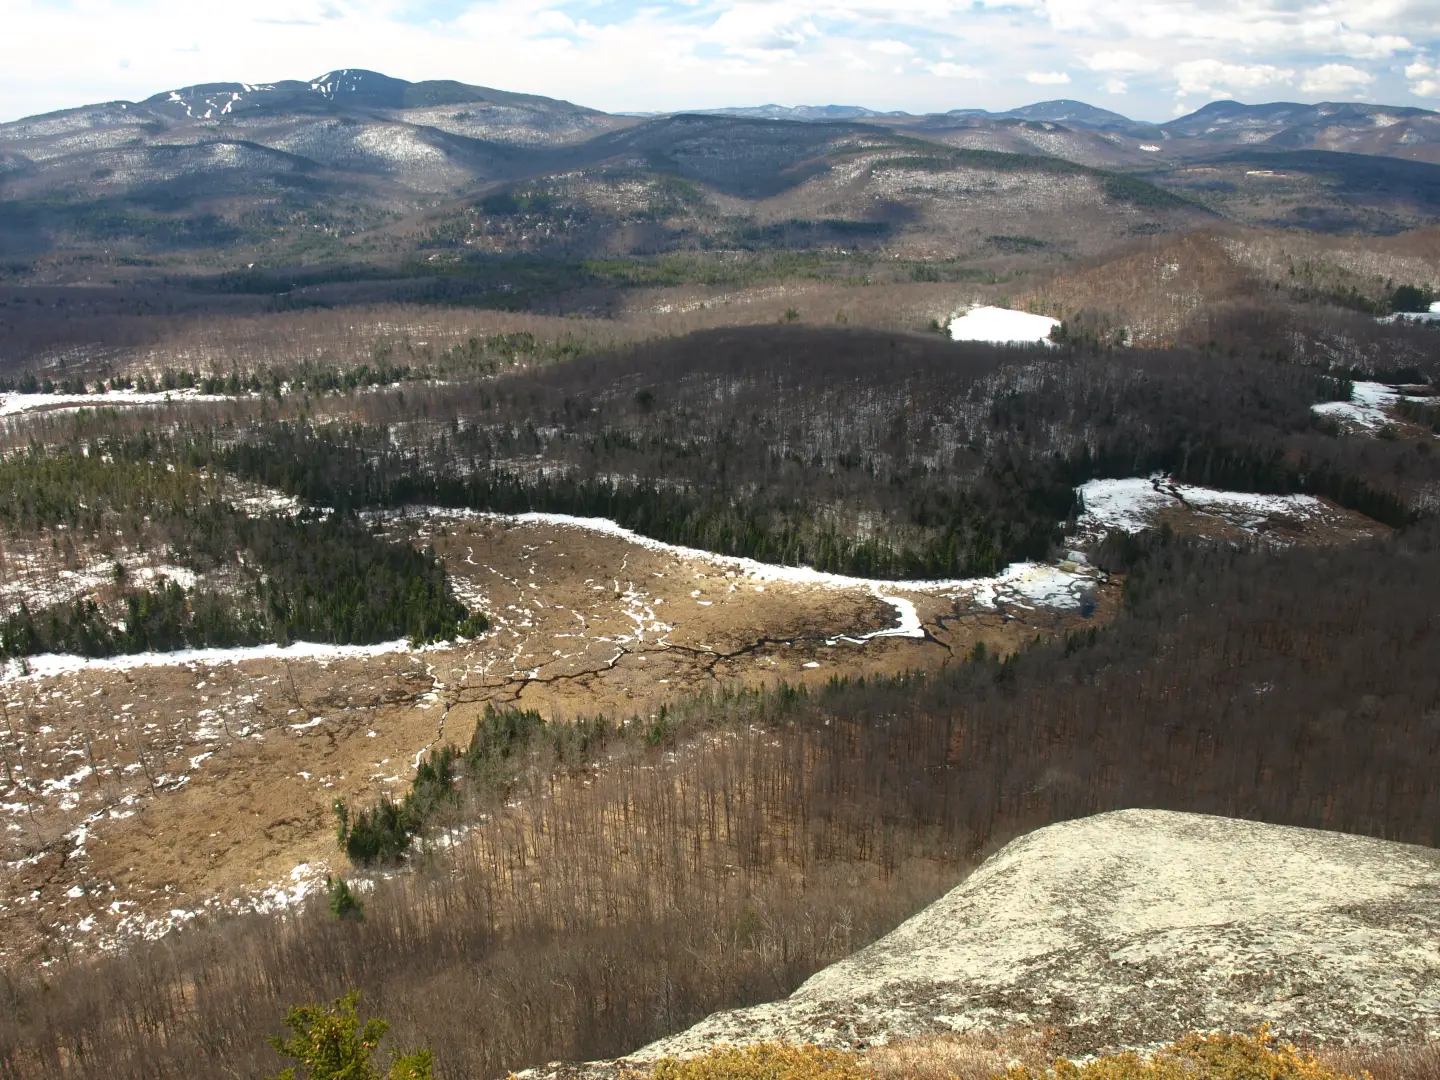 Moxham Mountain: A perfect addition to the Schroon Lake Region